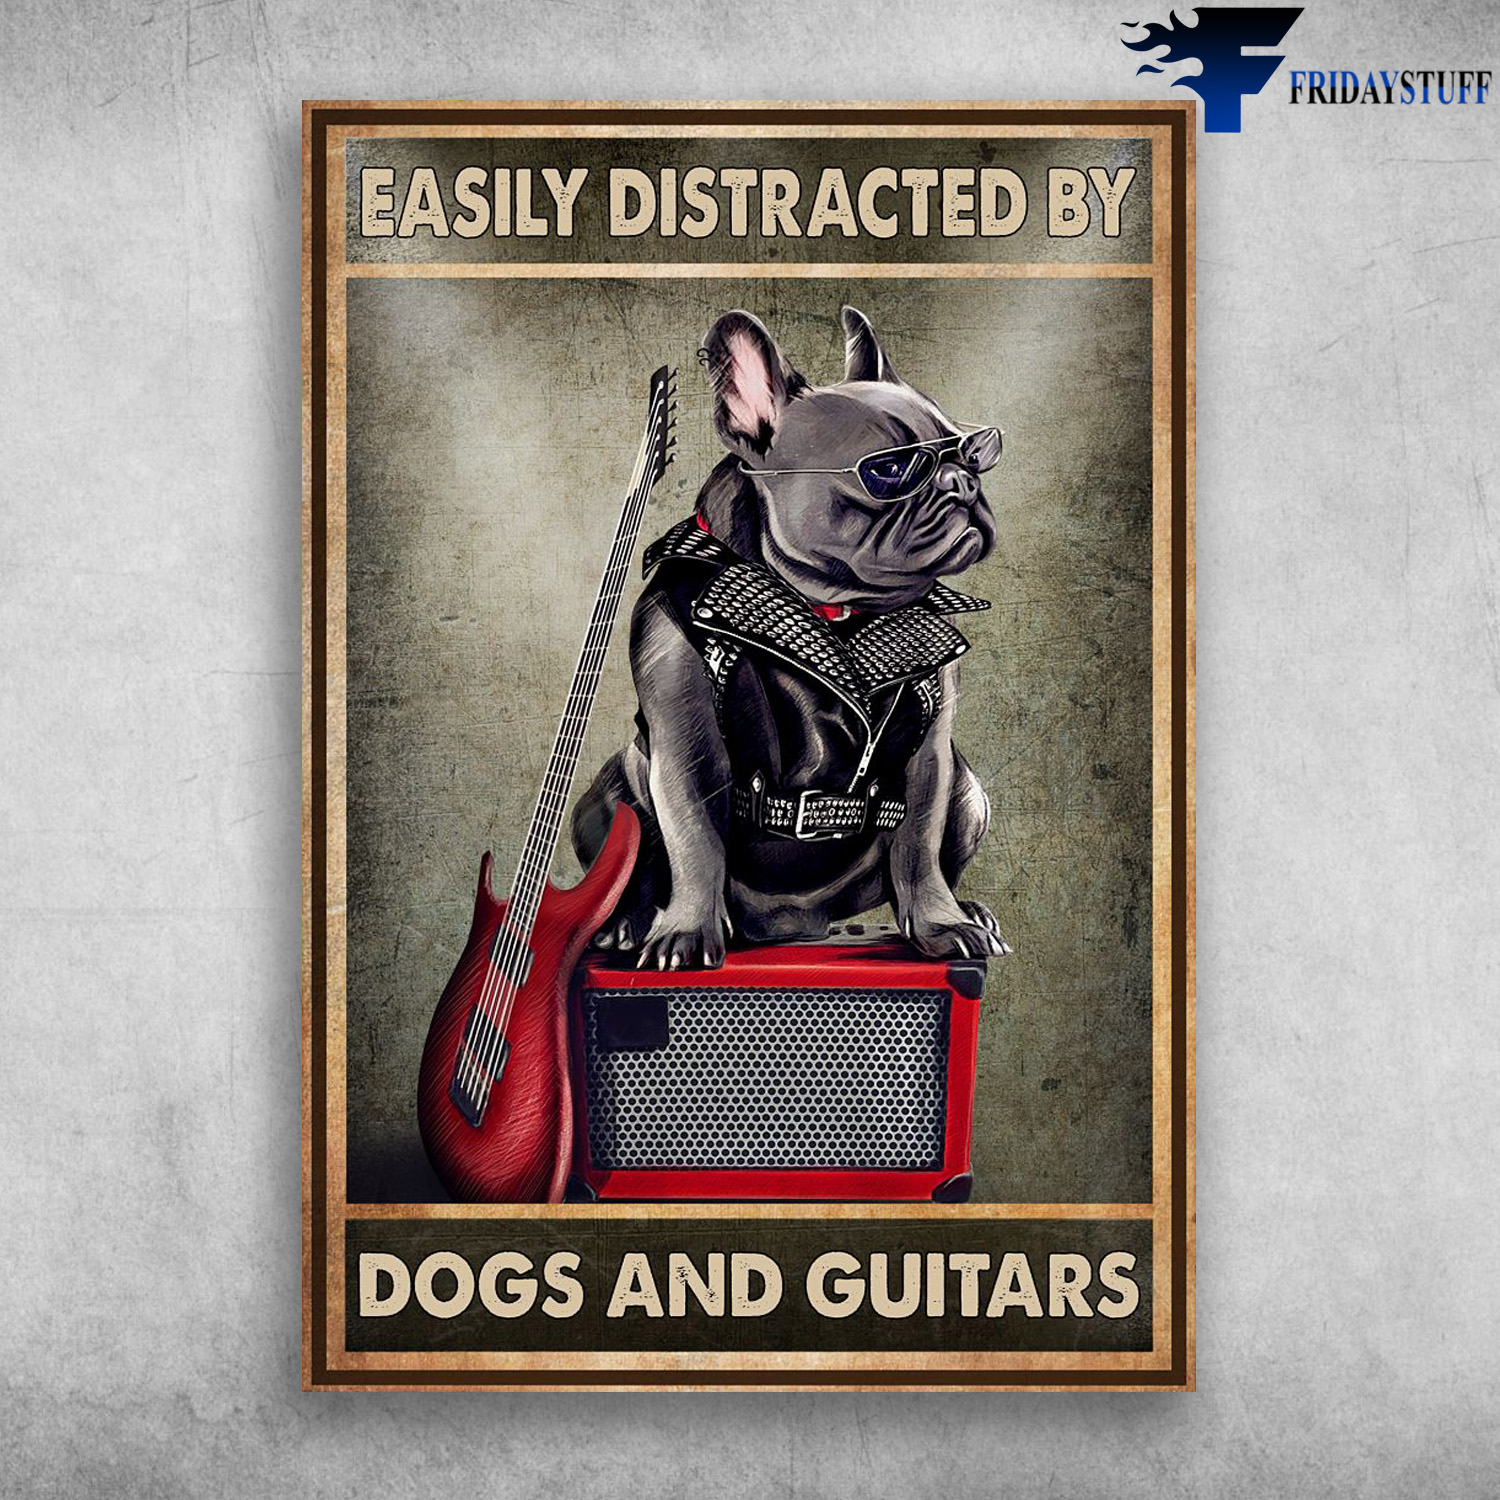 Pug Rock, Electric Guitar Pug - Easily Distracted By, Dogs And Guitars